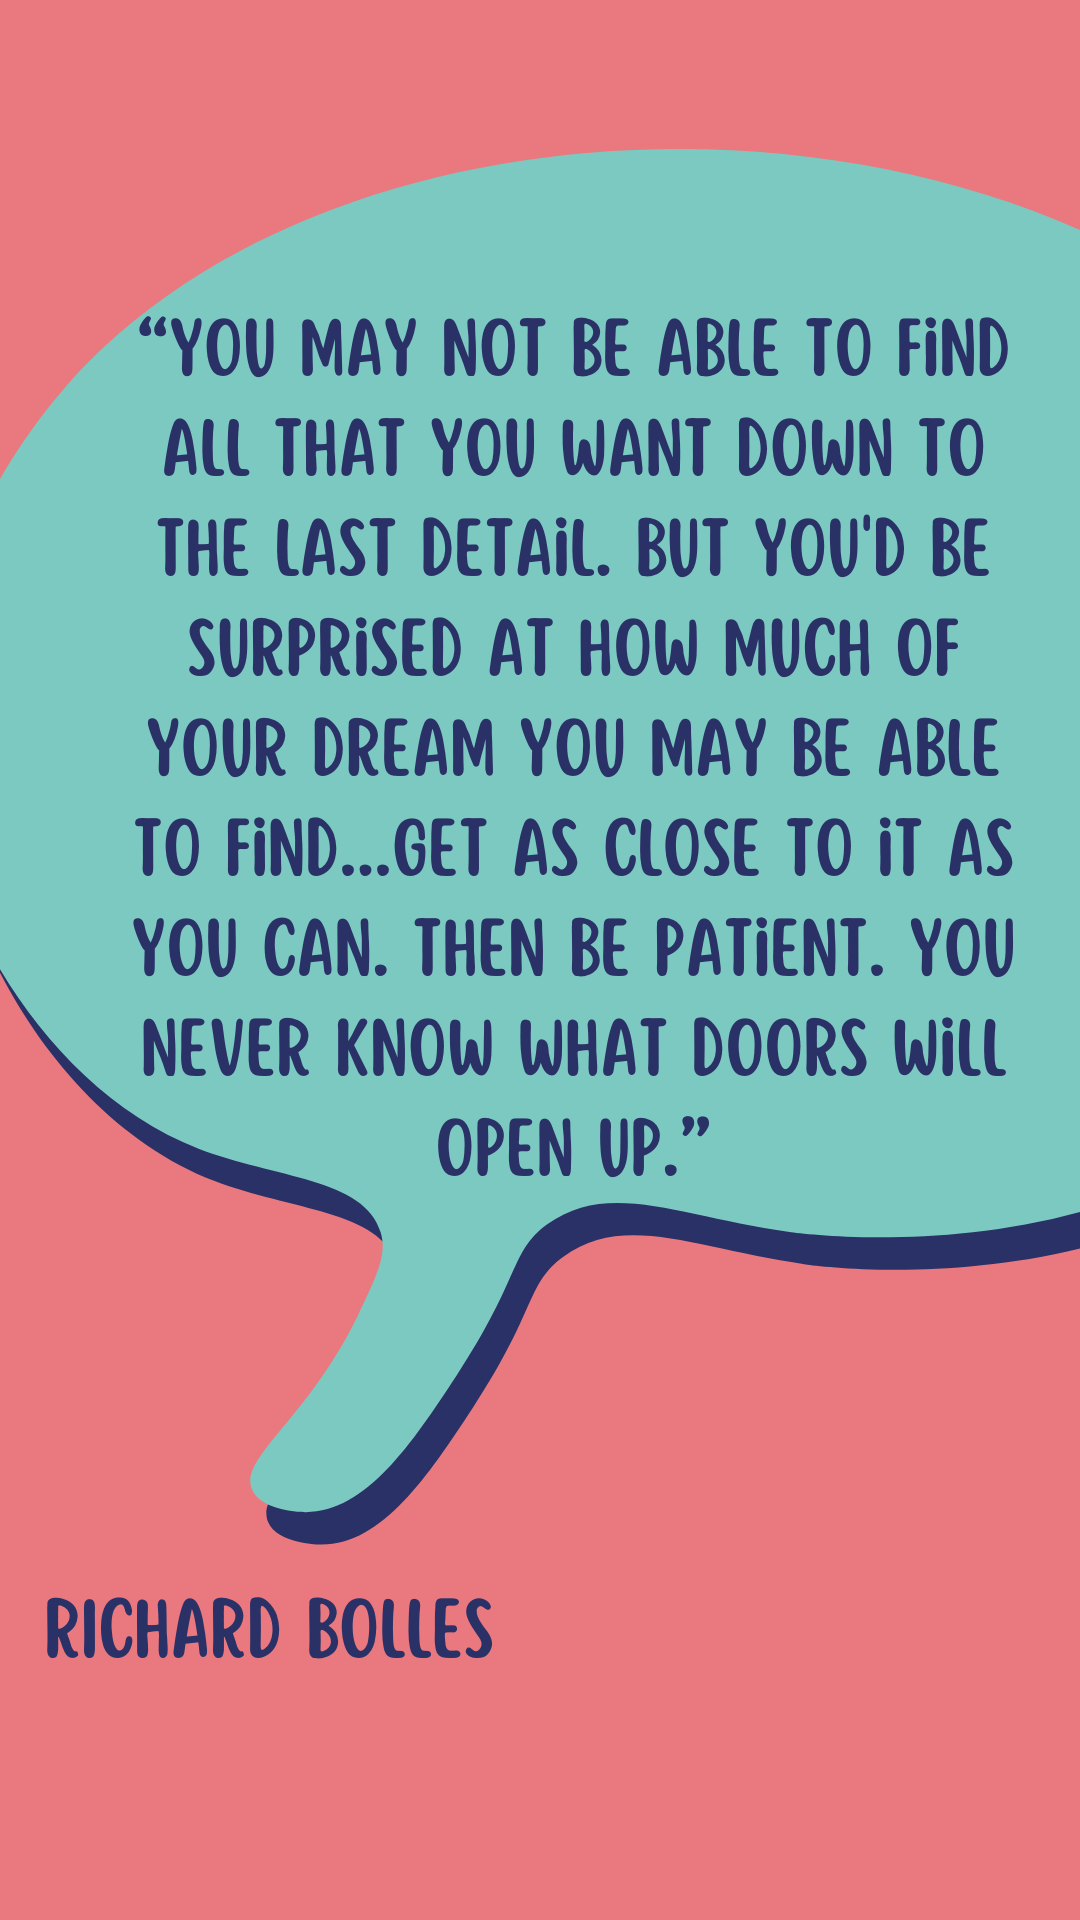 Richard Bolles says, “You may not be able to find all that you want down to the last detail. But you’d be surprised at how much of your dream you may be able to find…Get as close to it as you can. Then be patient. You never know what doors will open up.”